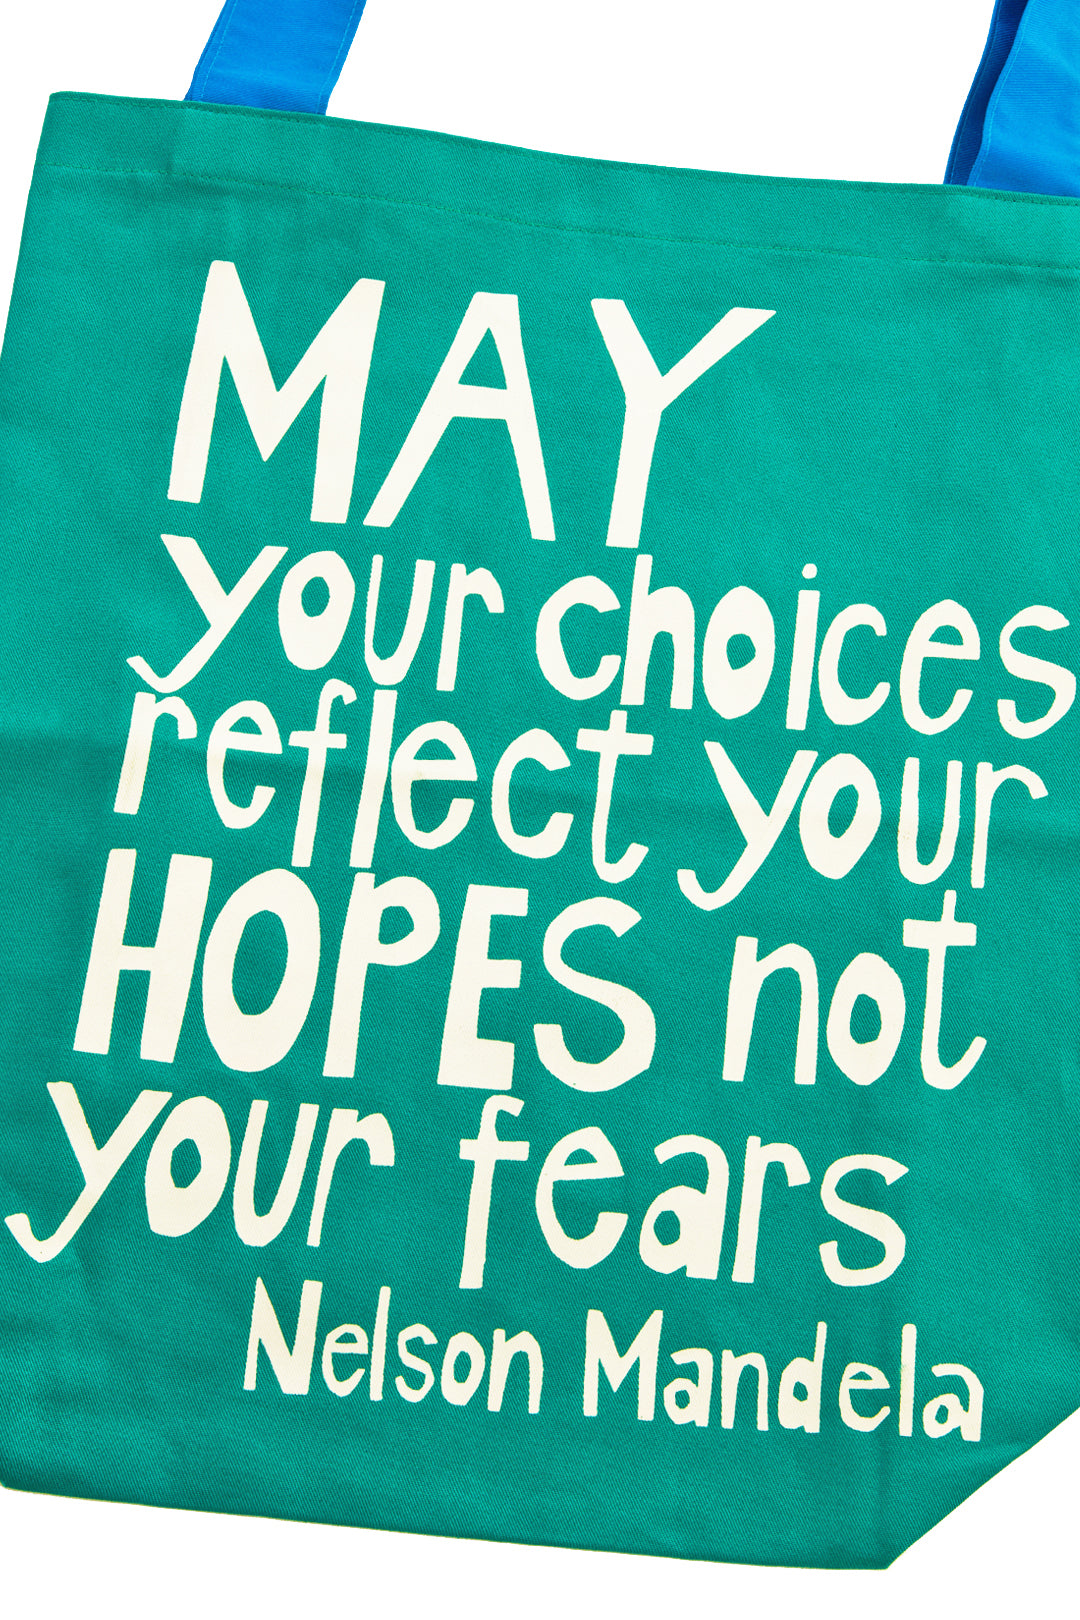 Teal "Reflect Your Hopes" Nelson Mandela Tote